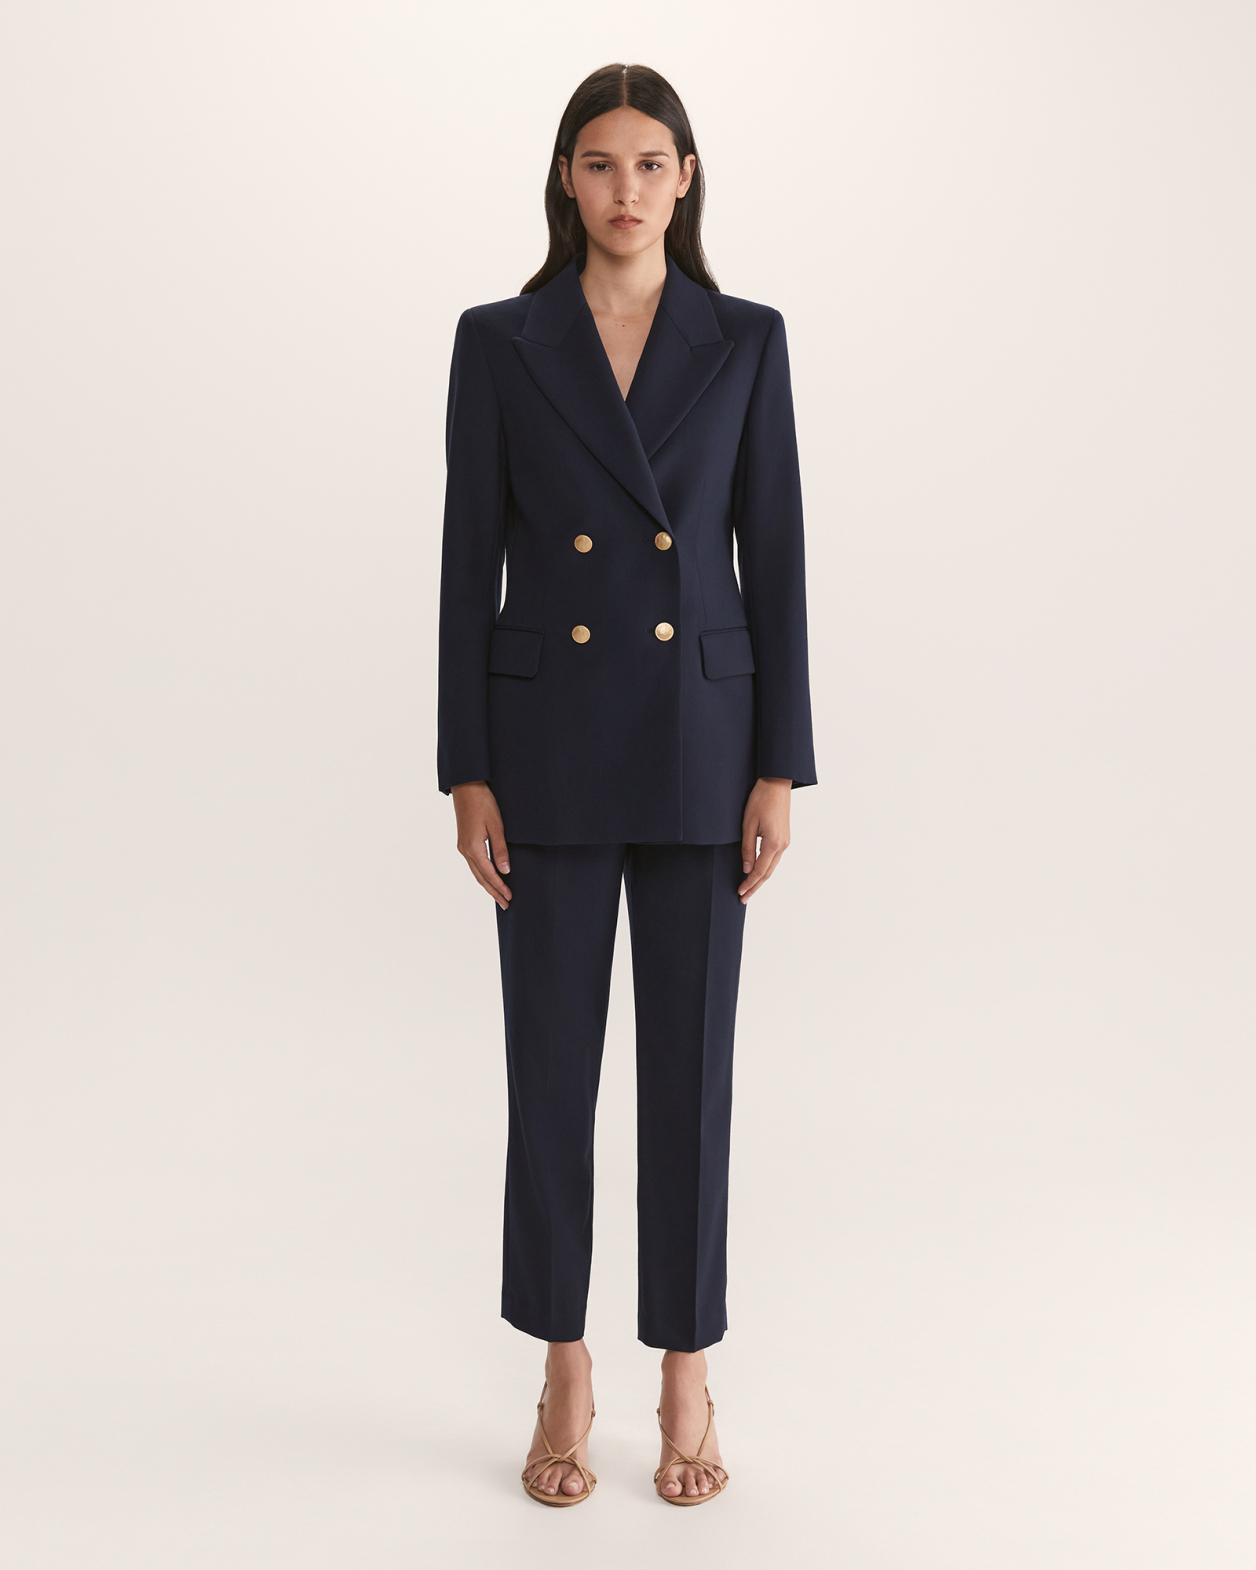 Celeste Wool Double Breasted Blazer in FRENCH NAVY